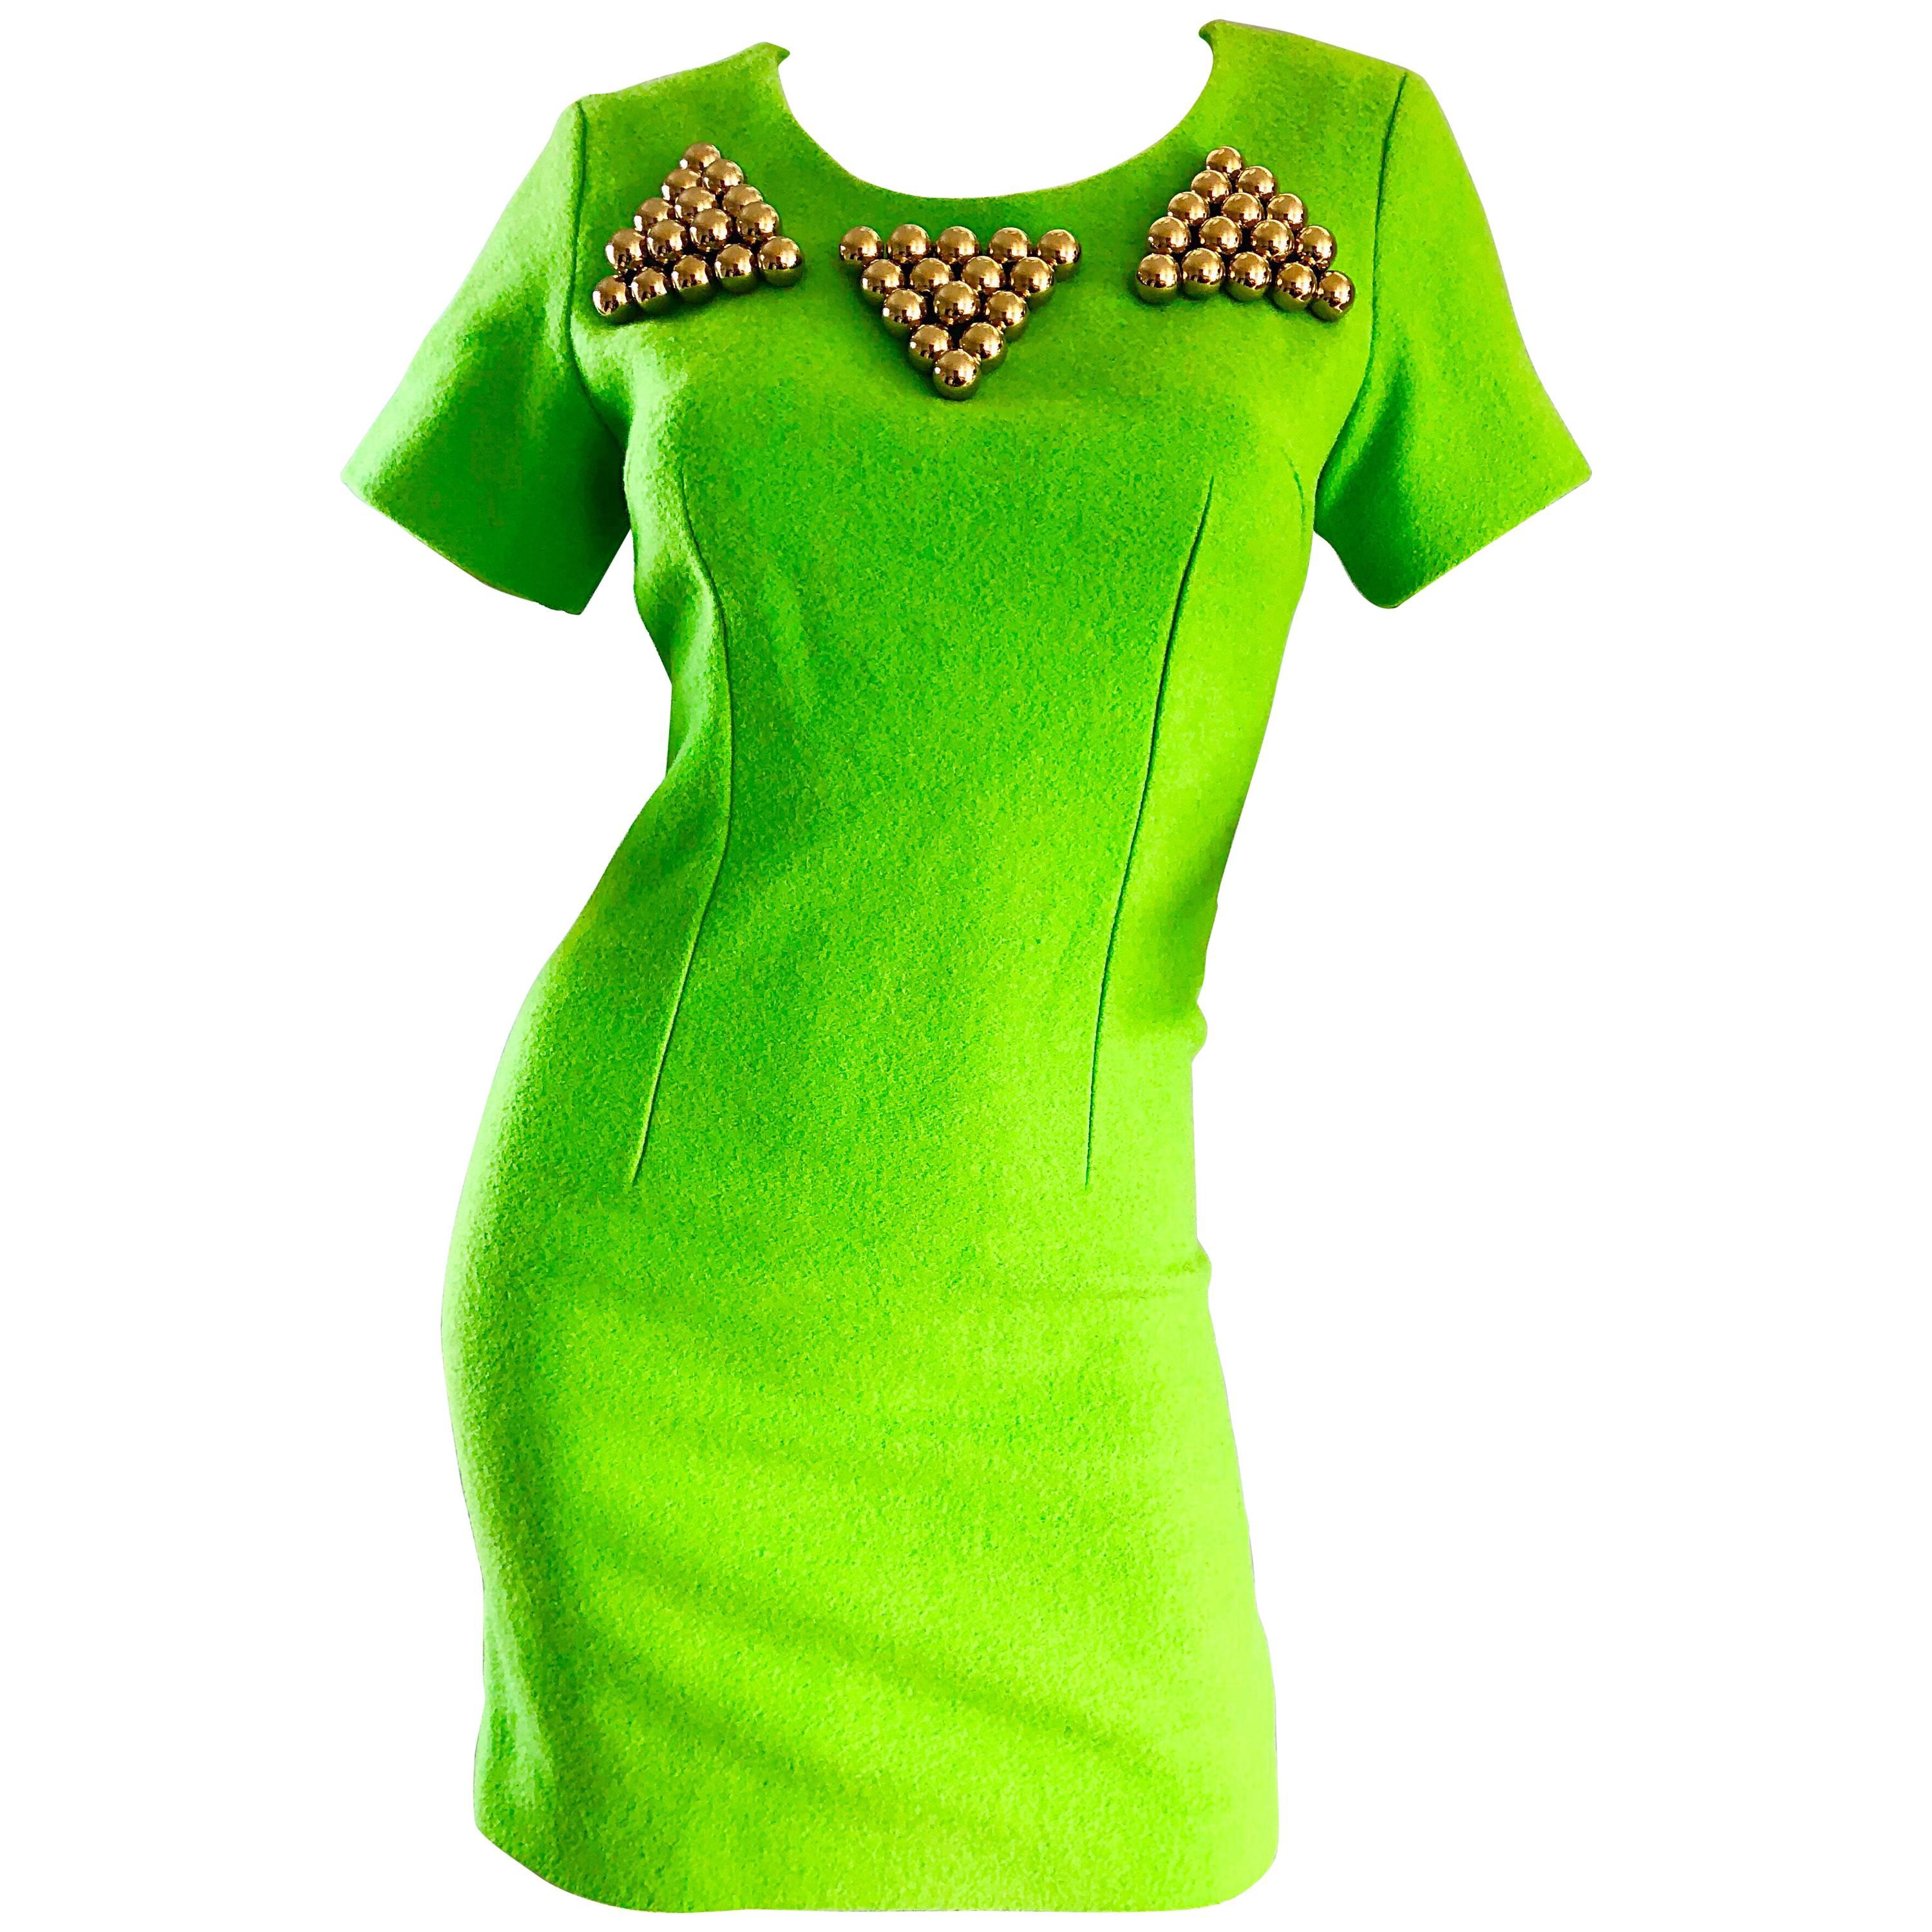 1990s Gianni Versace Neon Lime Green Bodycon Wool Vintage 90s Mini Dress For Sale